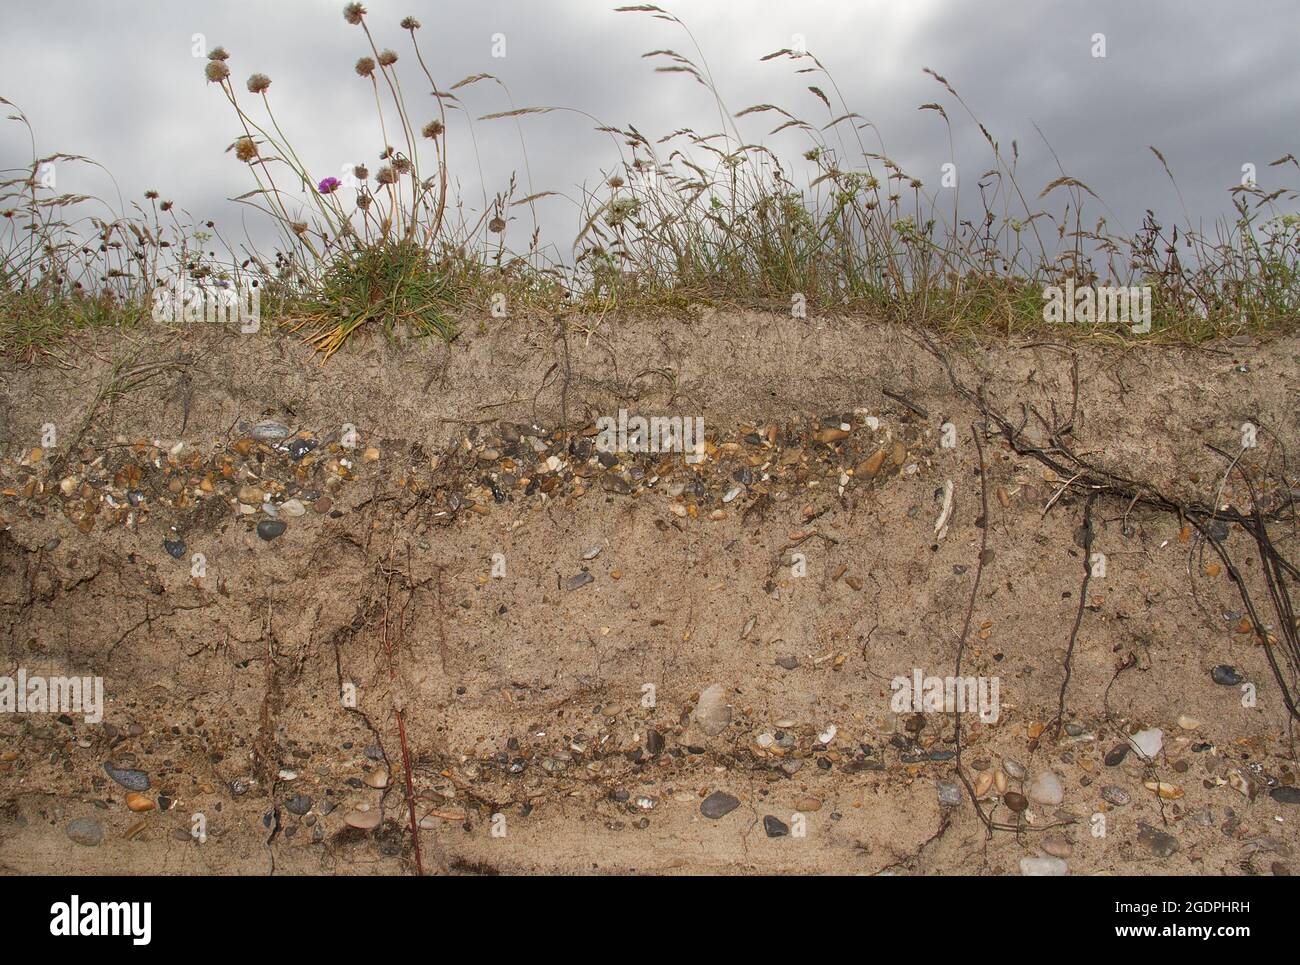 Alternation of layers of sand and gravel in a sediment under grassland near the coast Stock Photo